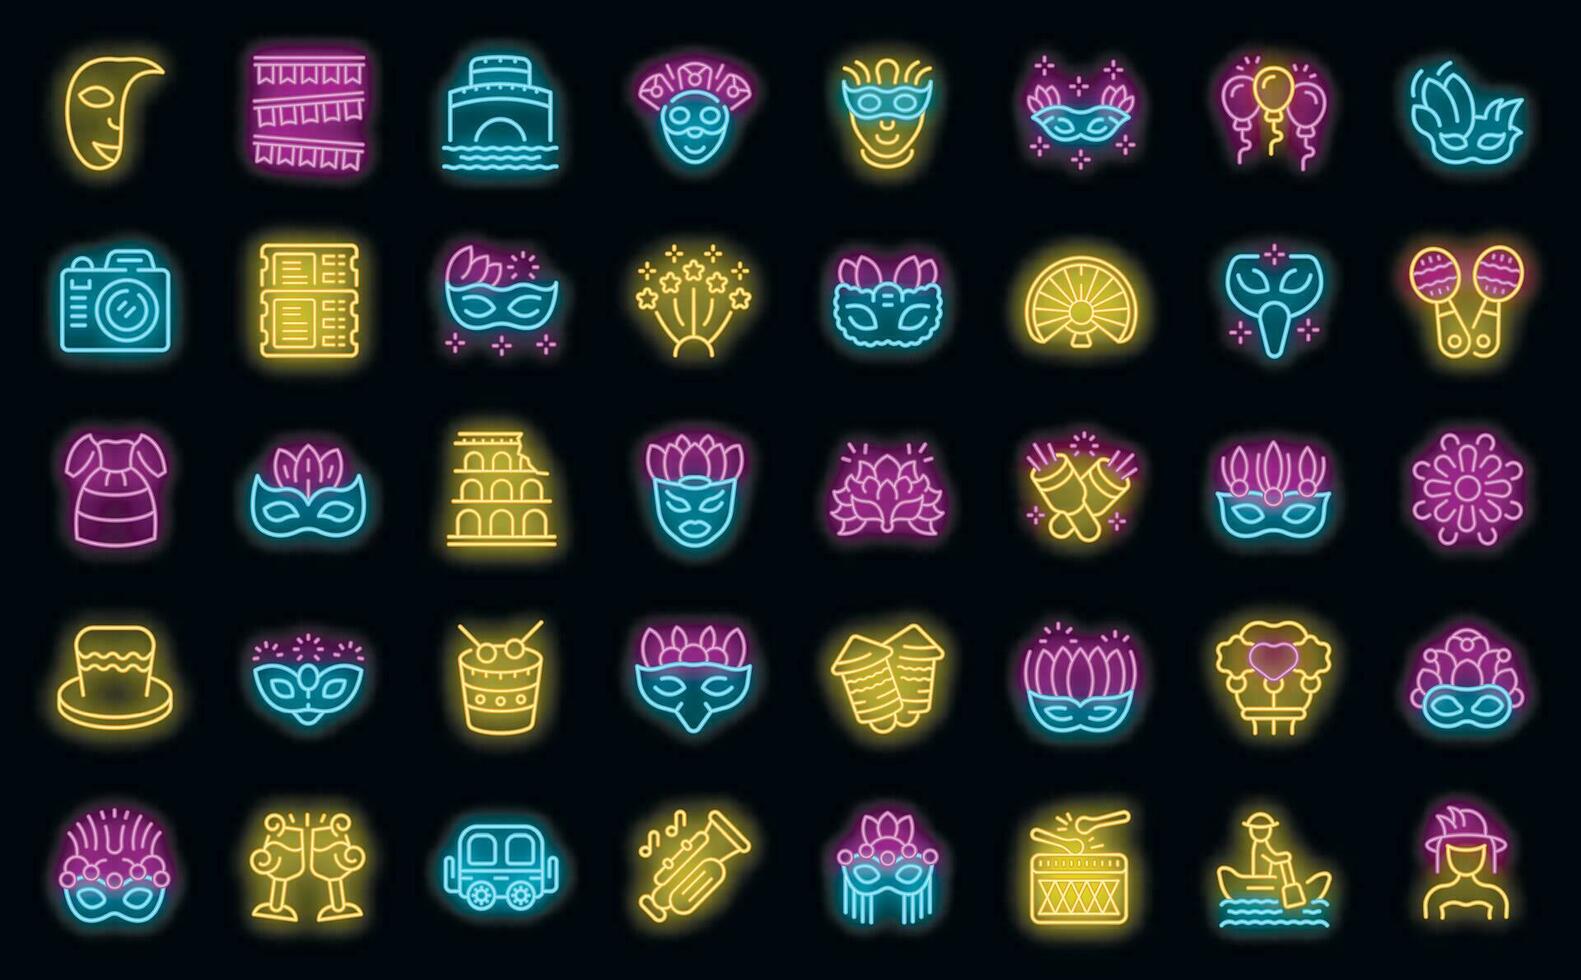 Carnival of Venice icons set vector neon